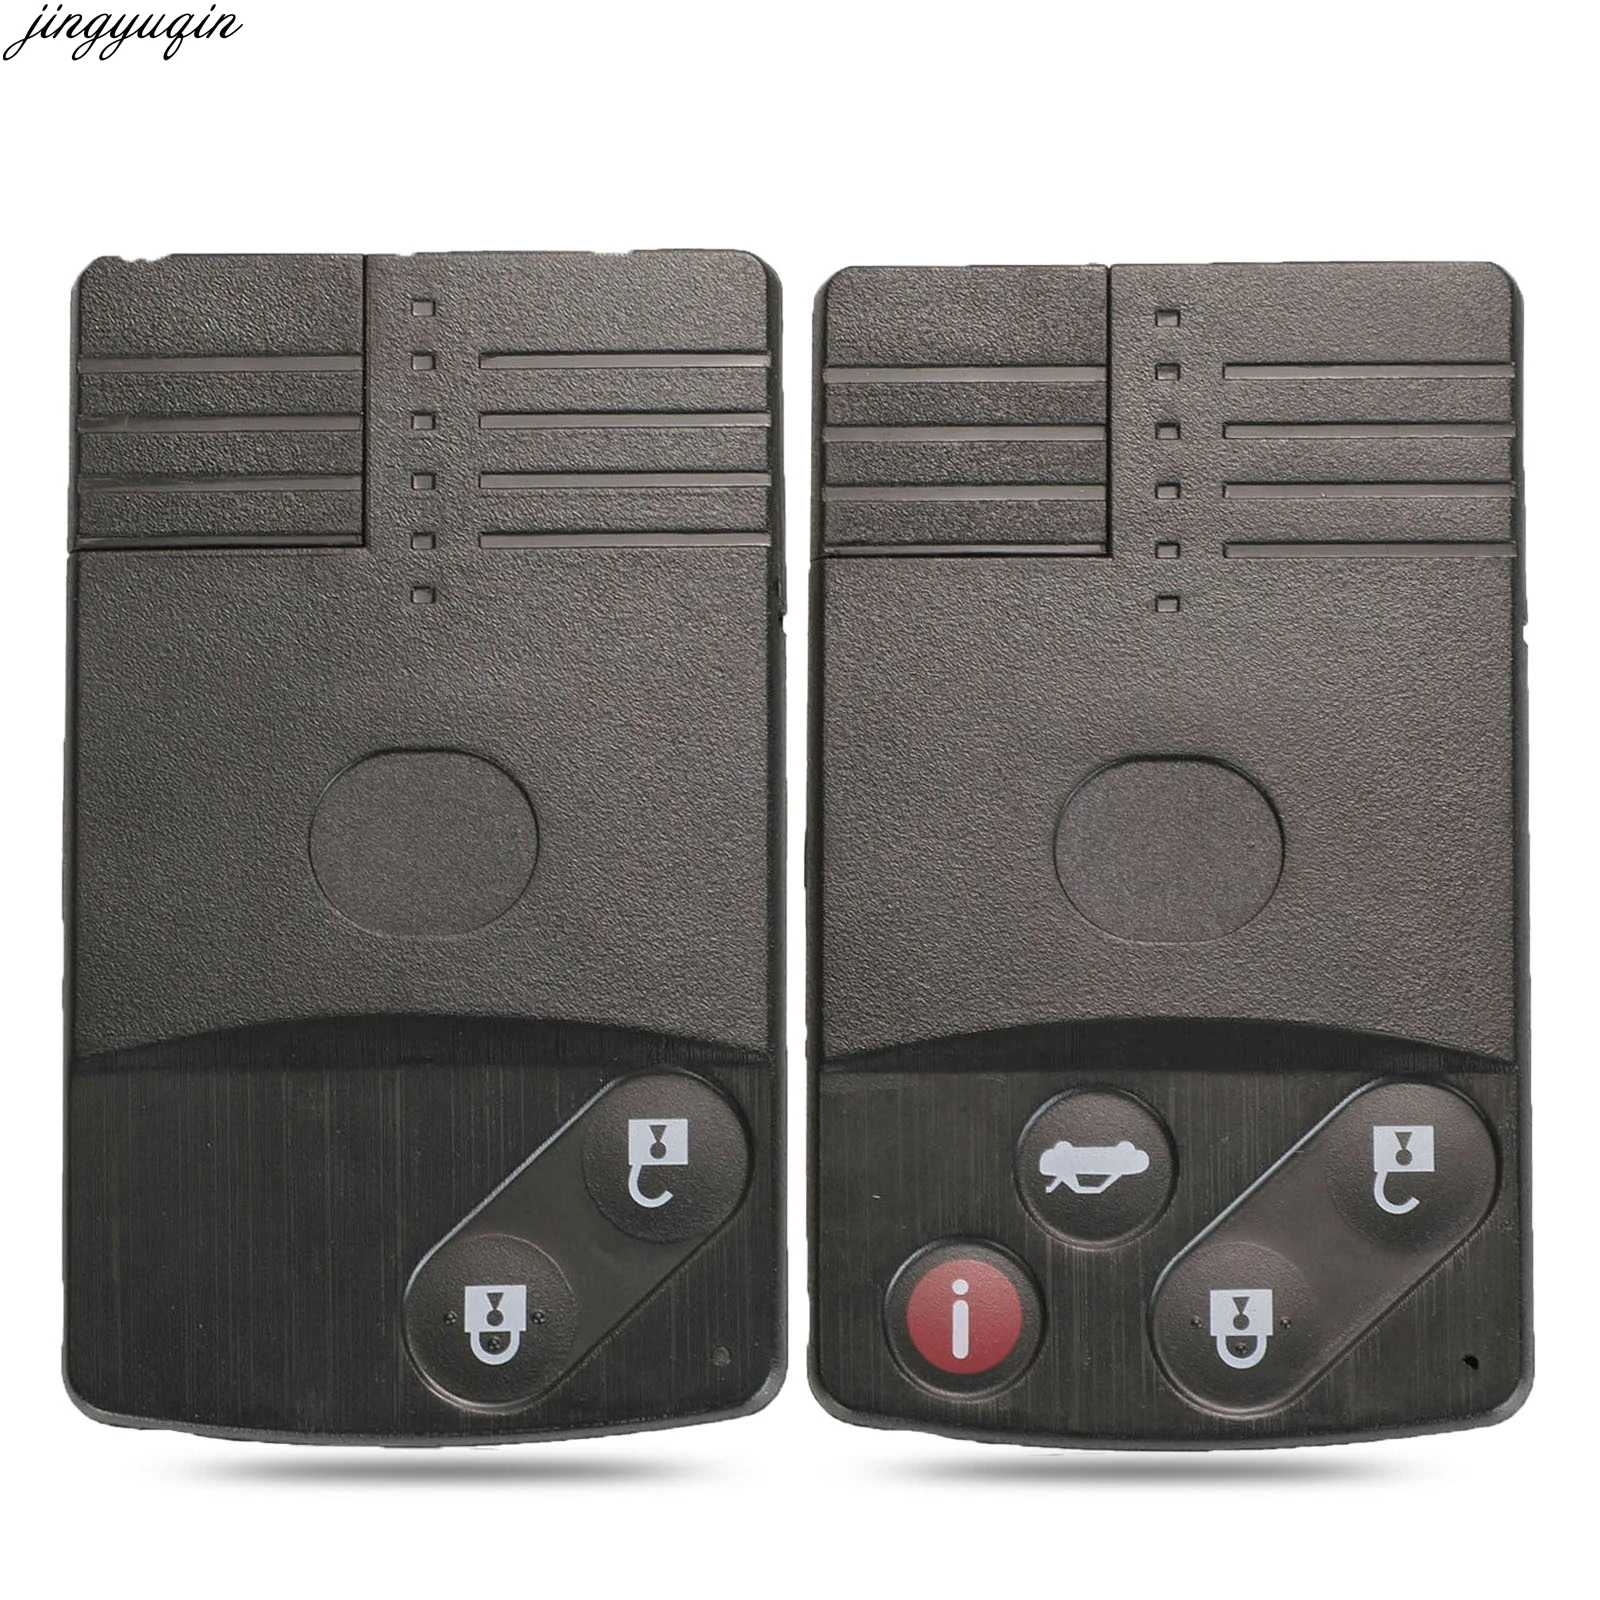 

Jingyuqin Smart Keyless Entry Car Key Case Shell For Mazda 5 6 CX-7 CX-9 RX8 Miata MX5 2/4 Buttons Remote FOB Replacement